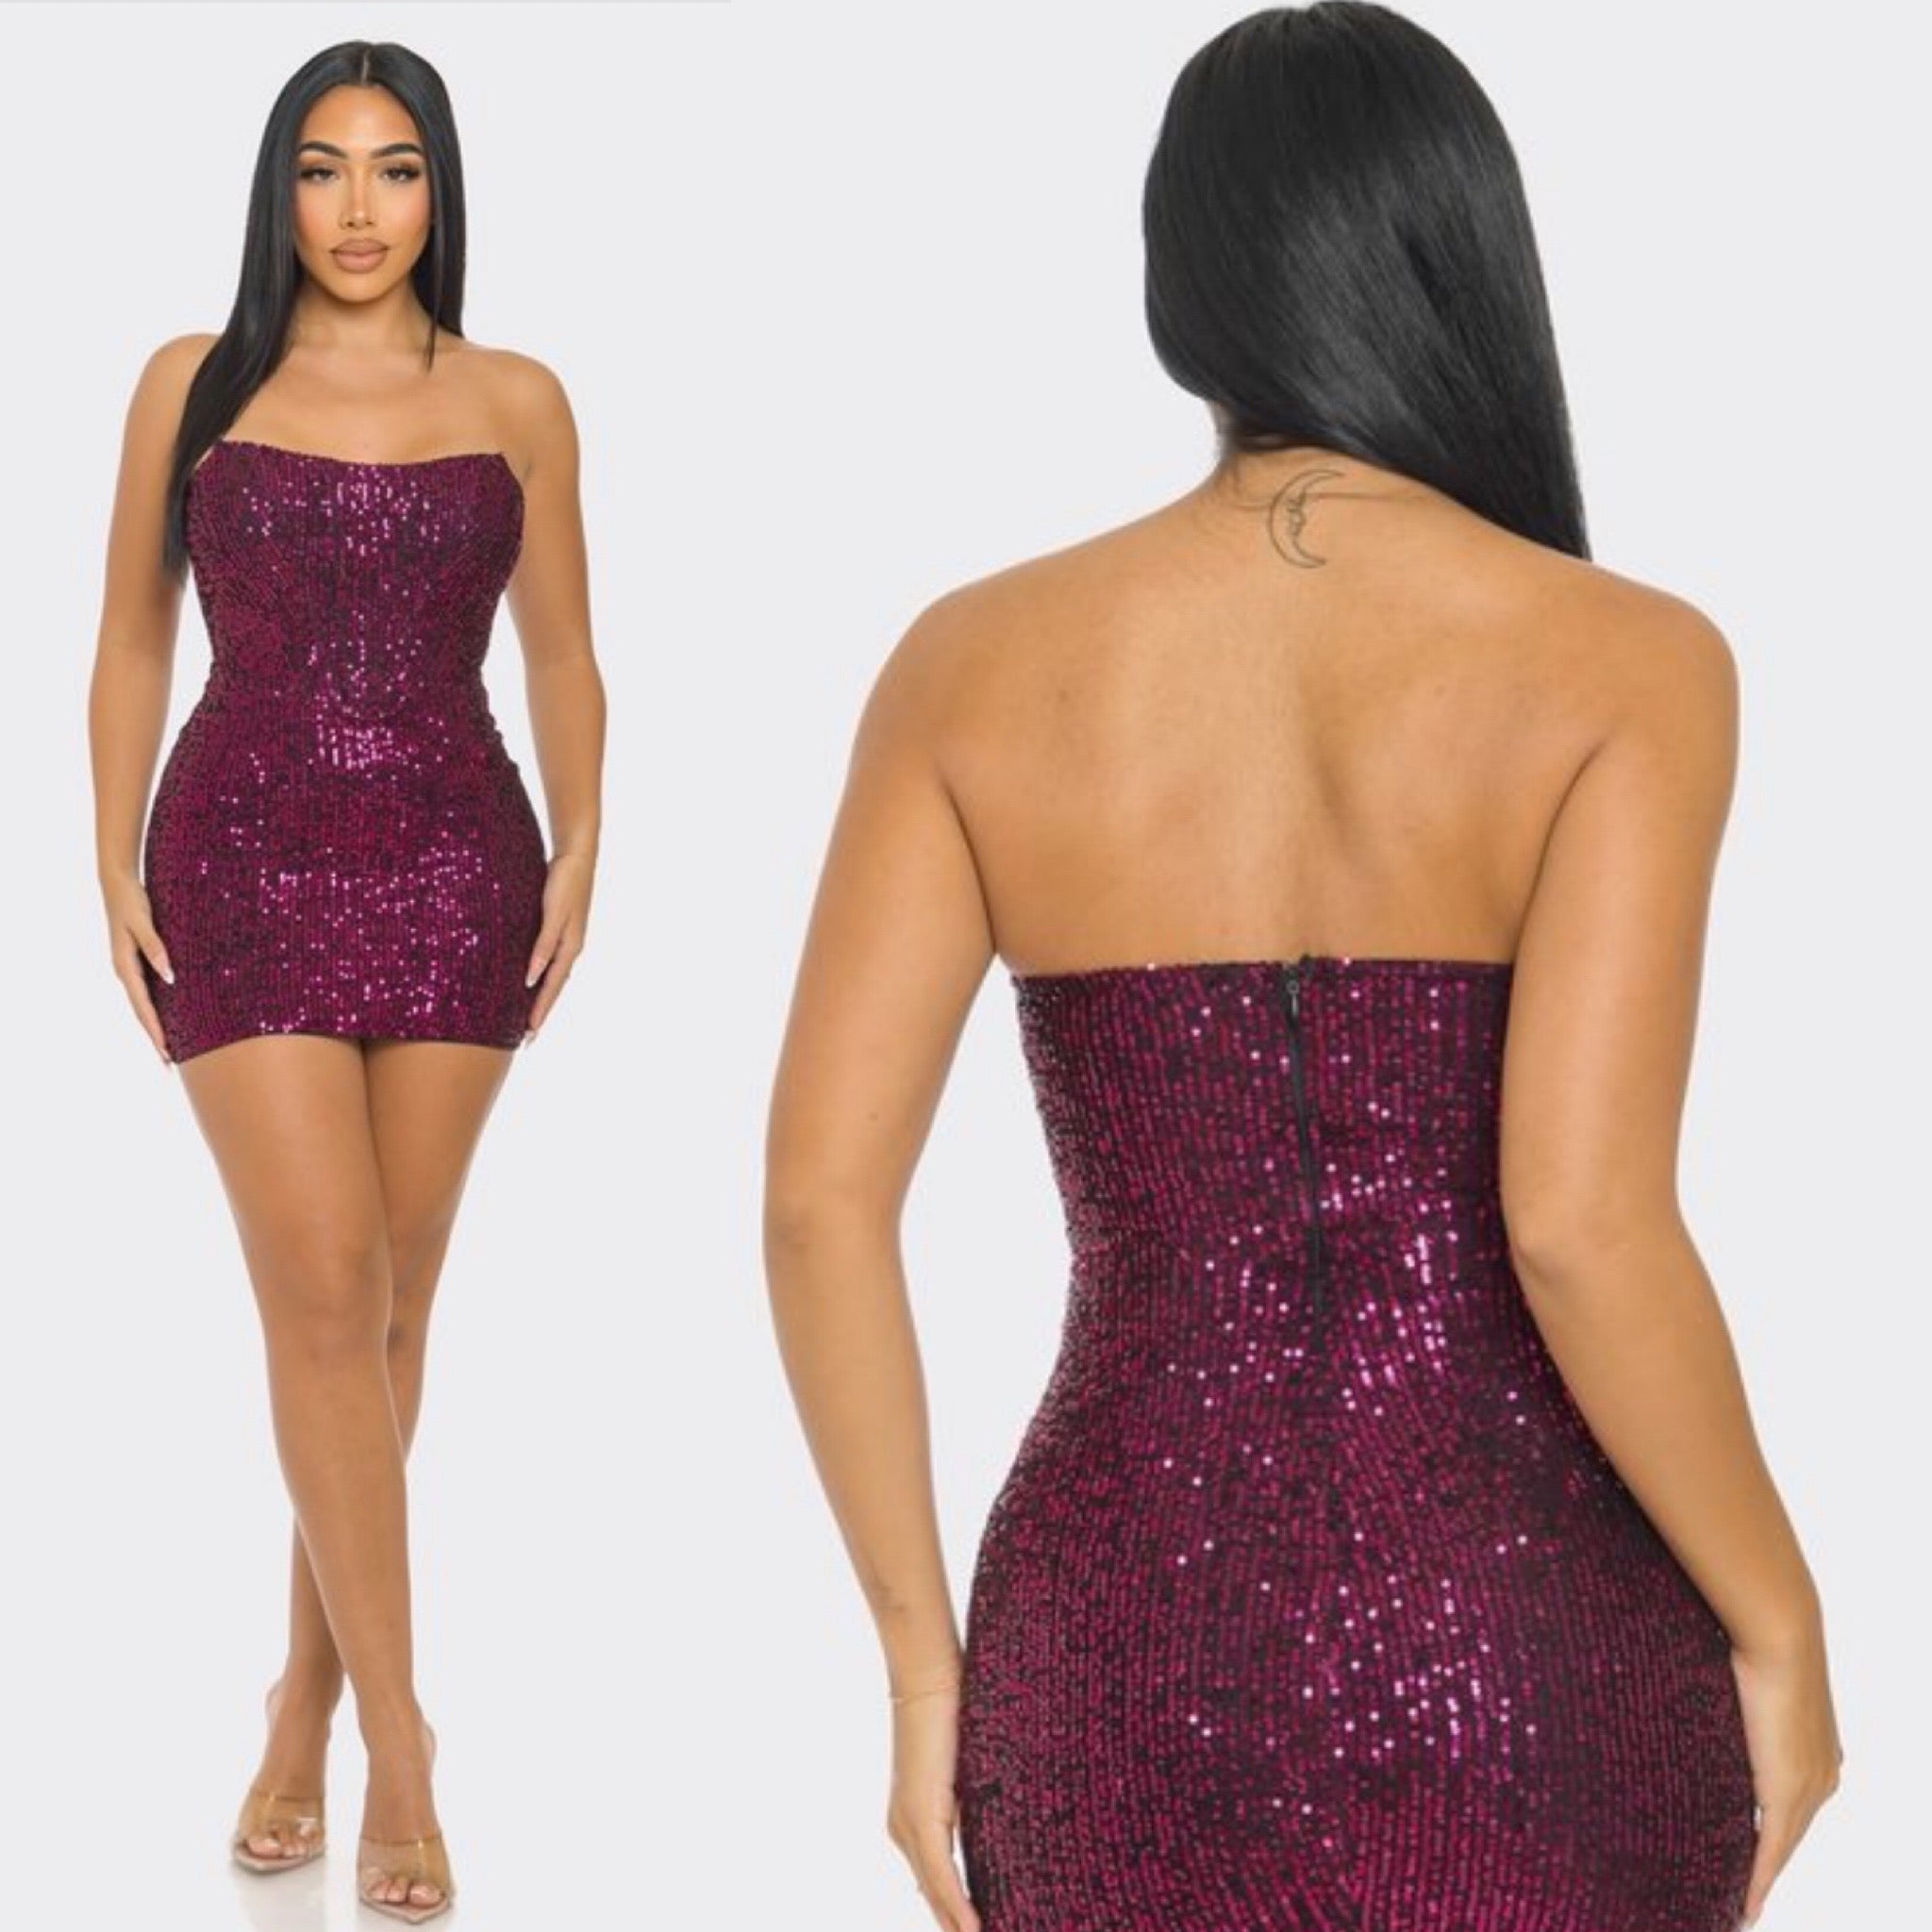 The “Forever Glam” Sequin Dress